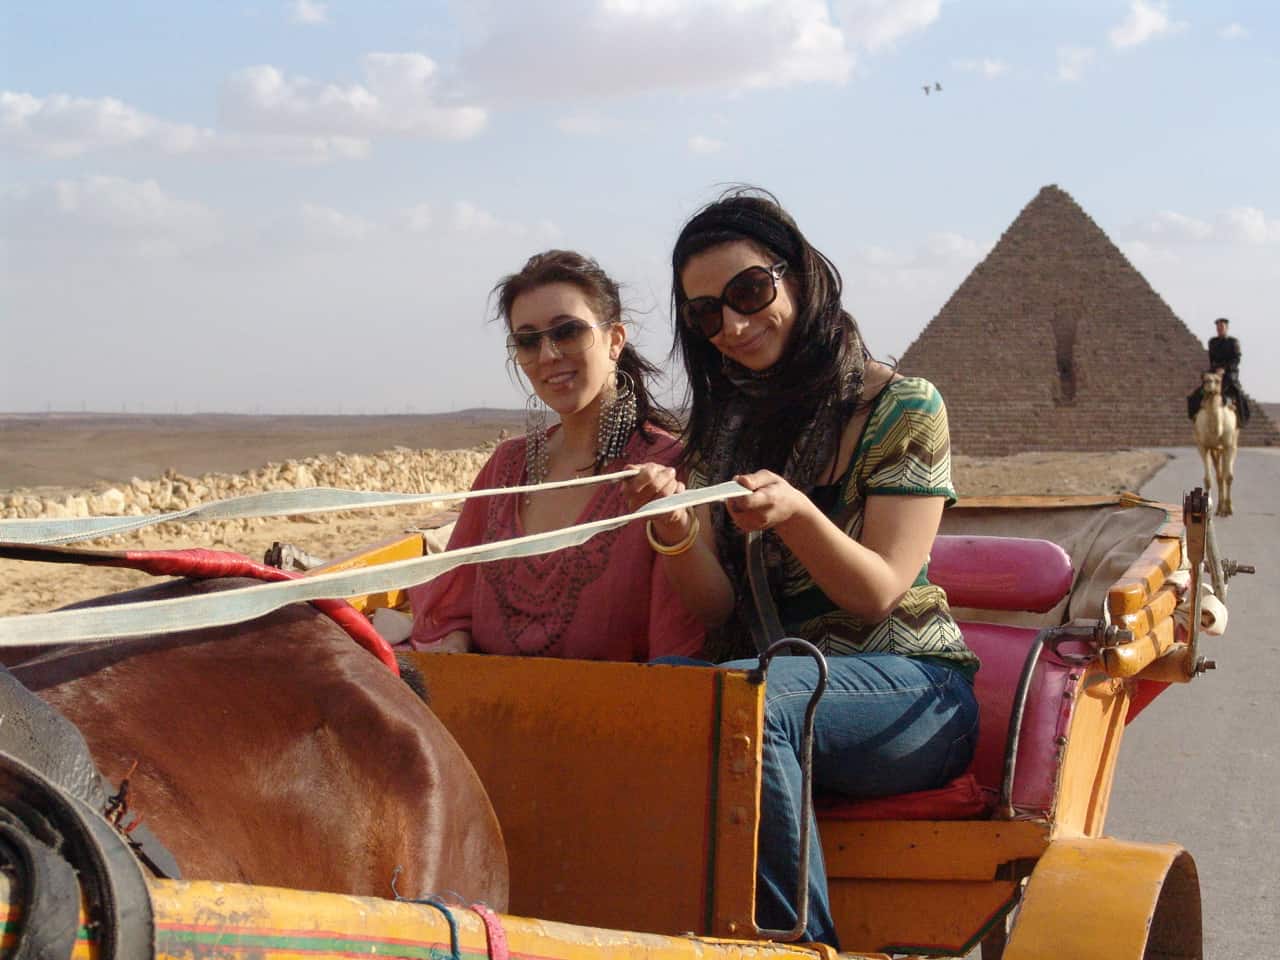 Dana and Maria on a carriage at the Pyramids of Giza in Egypt